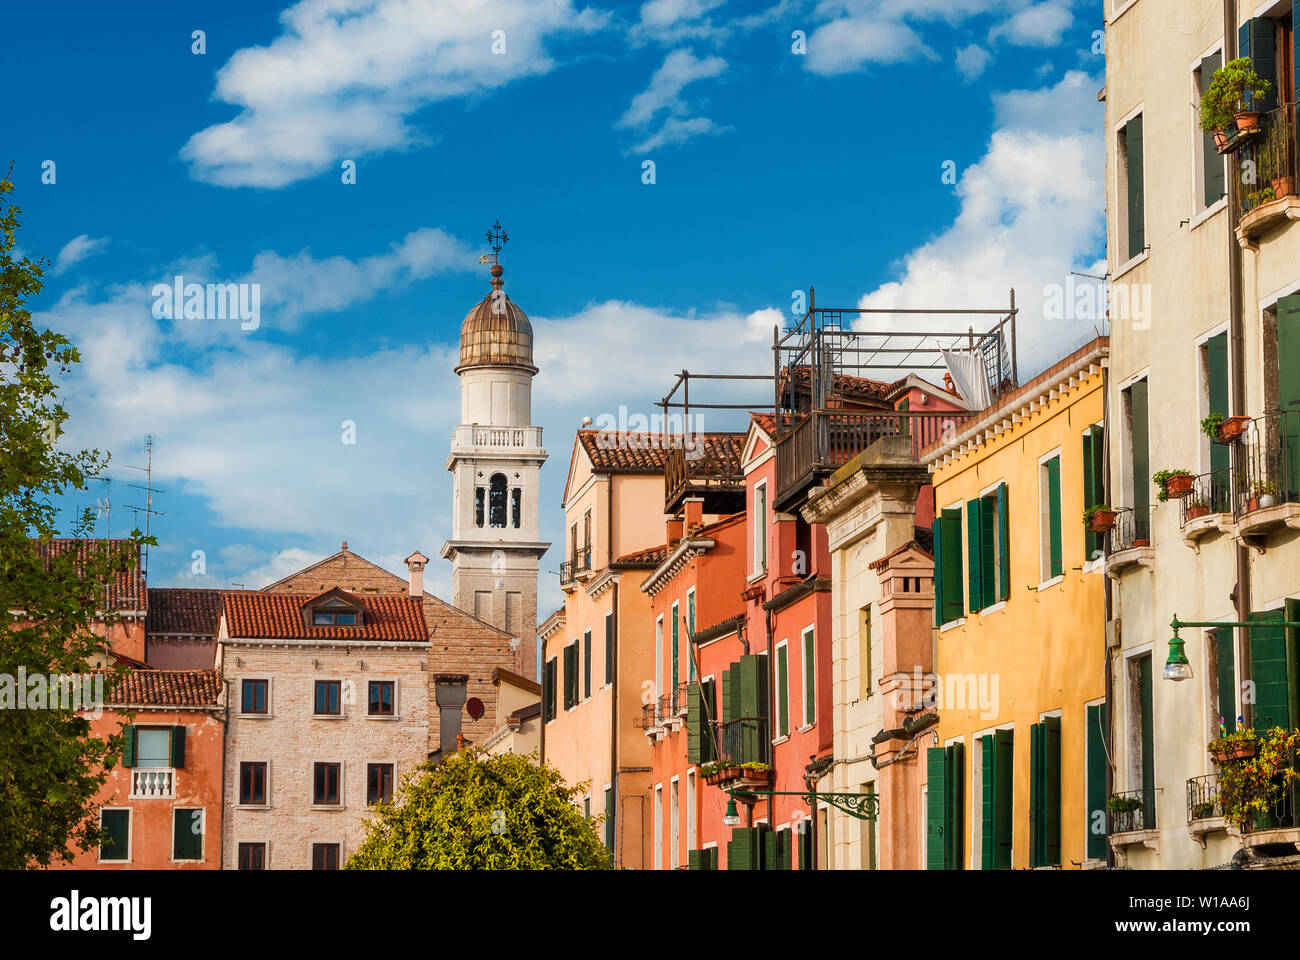 Venice historic center beautiful and characteristic old venetian houses with church bell tower Stock Photo